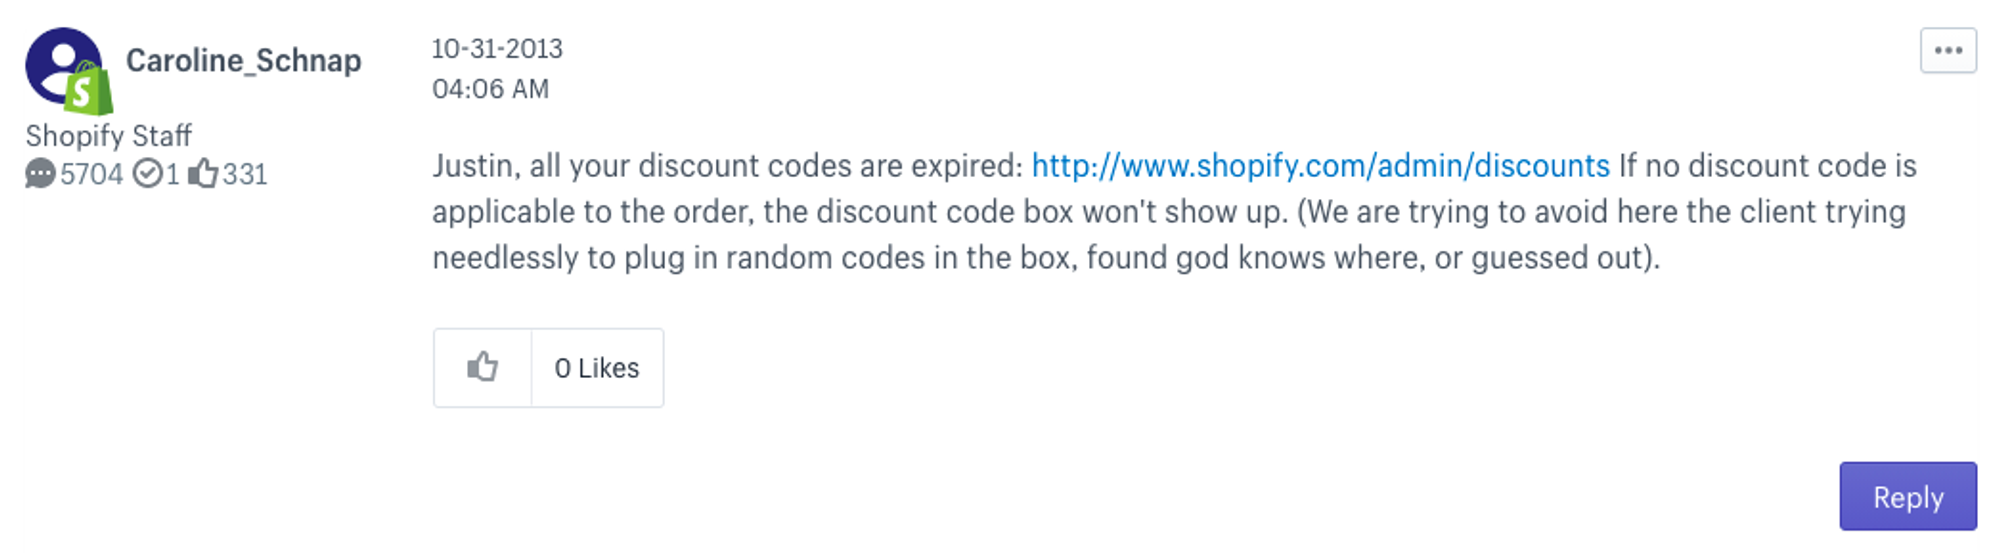 Response from the Shopify Staff about discount code box visibility in checkout page